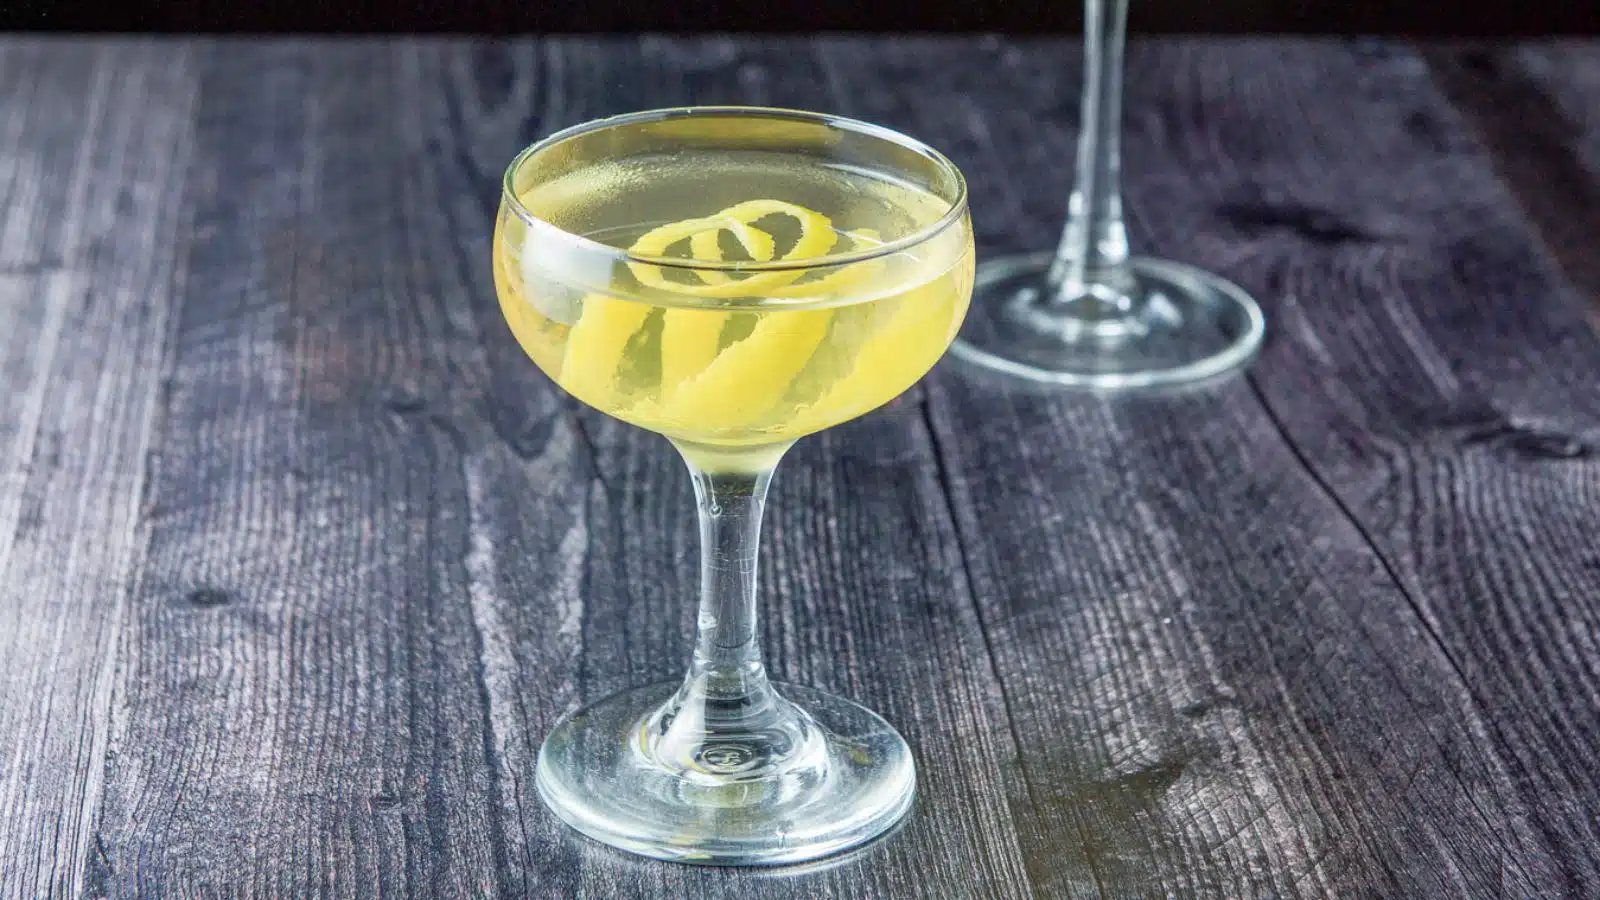 A coupe glass filled with the clear cocktail with lemon twists